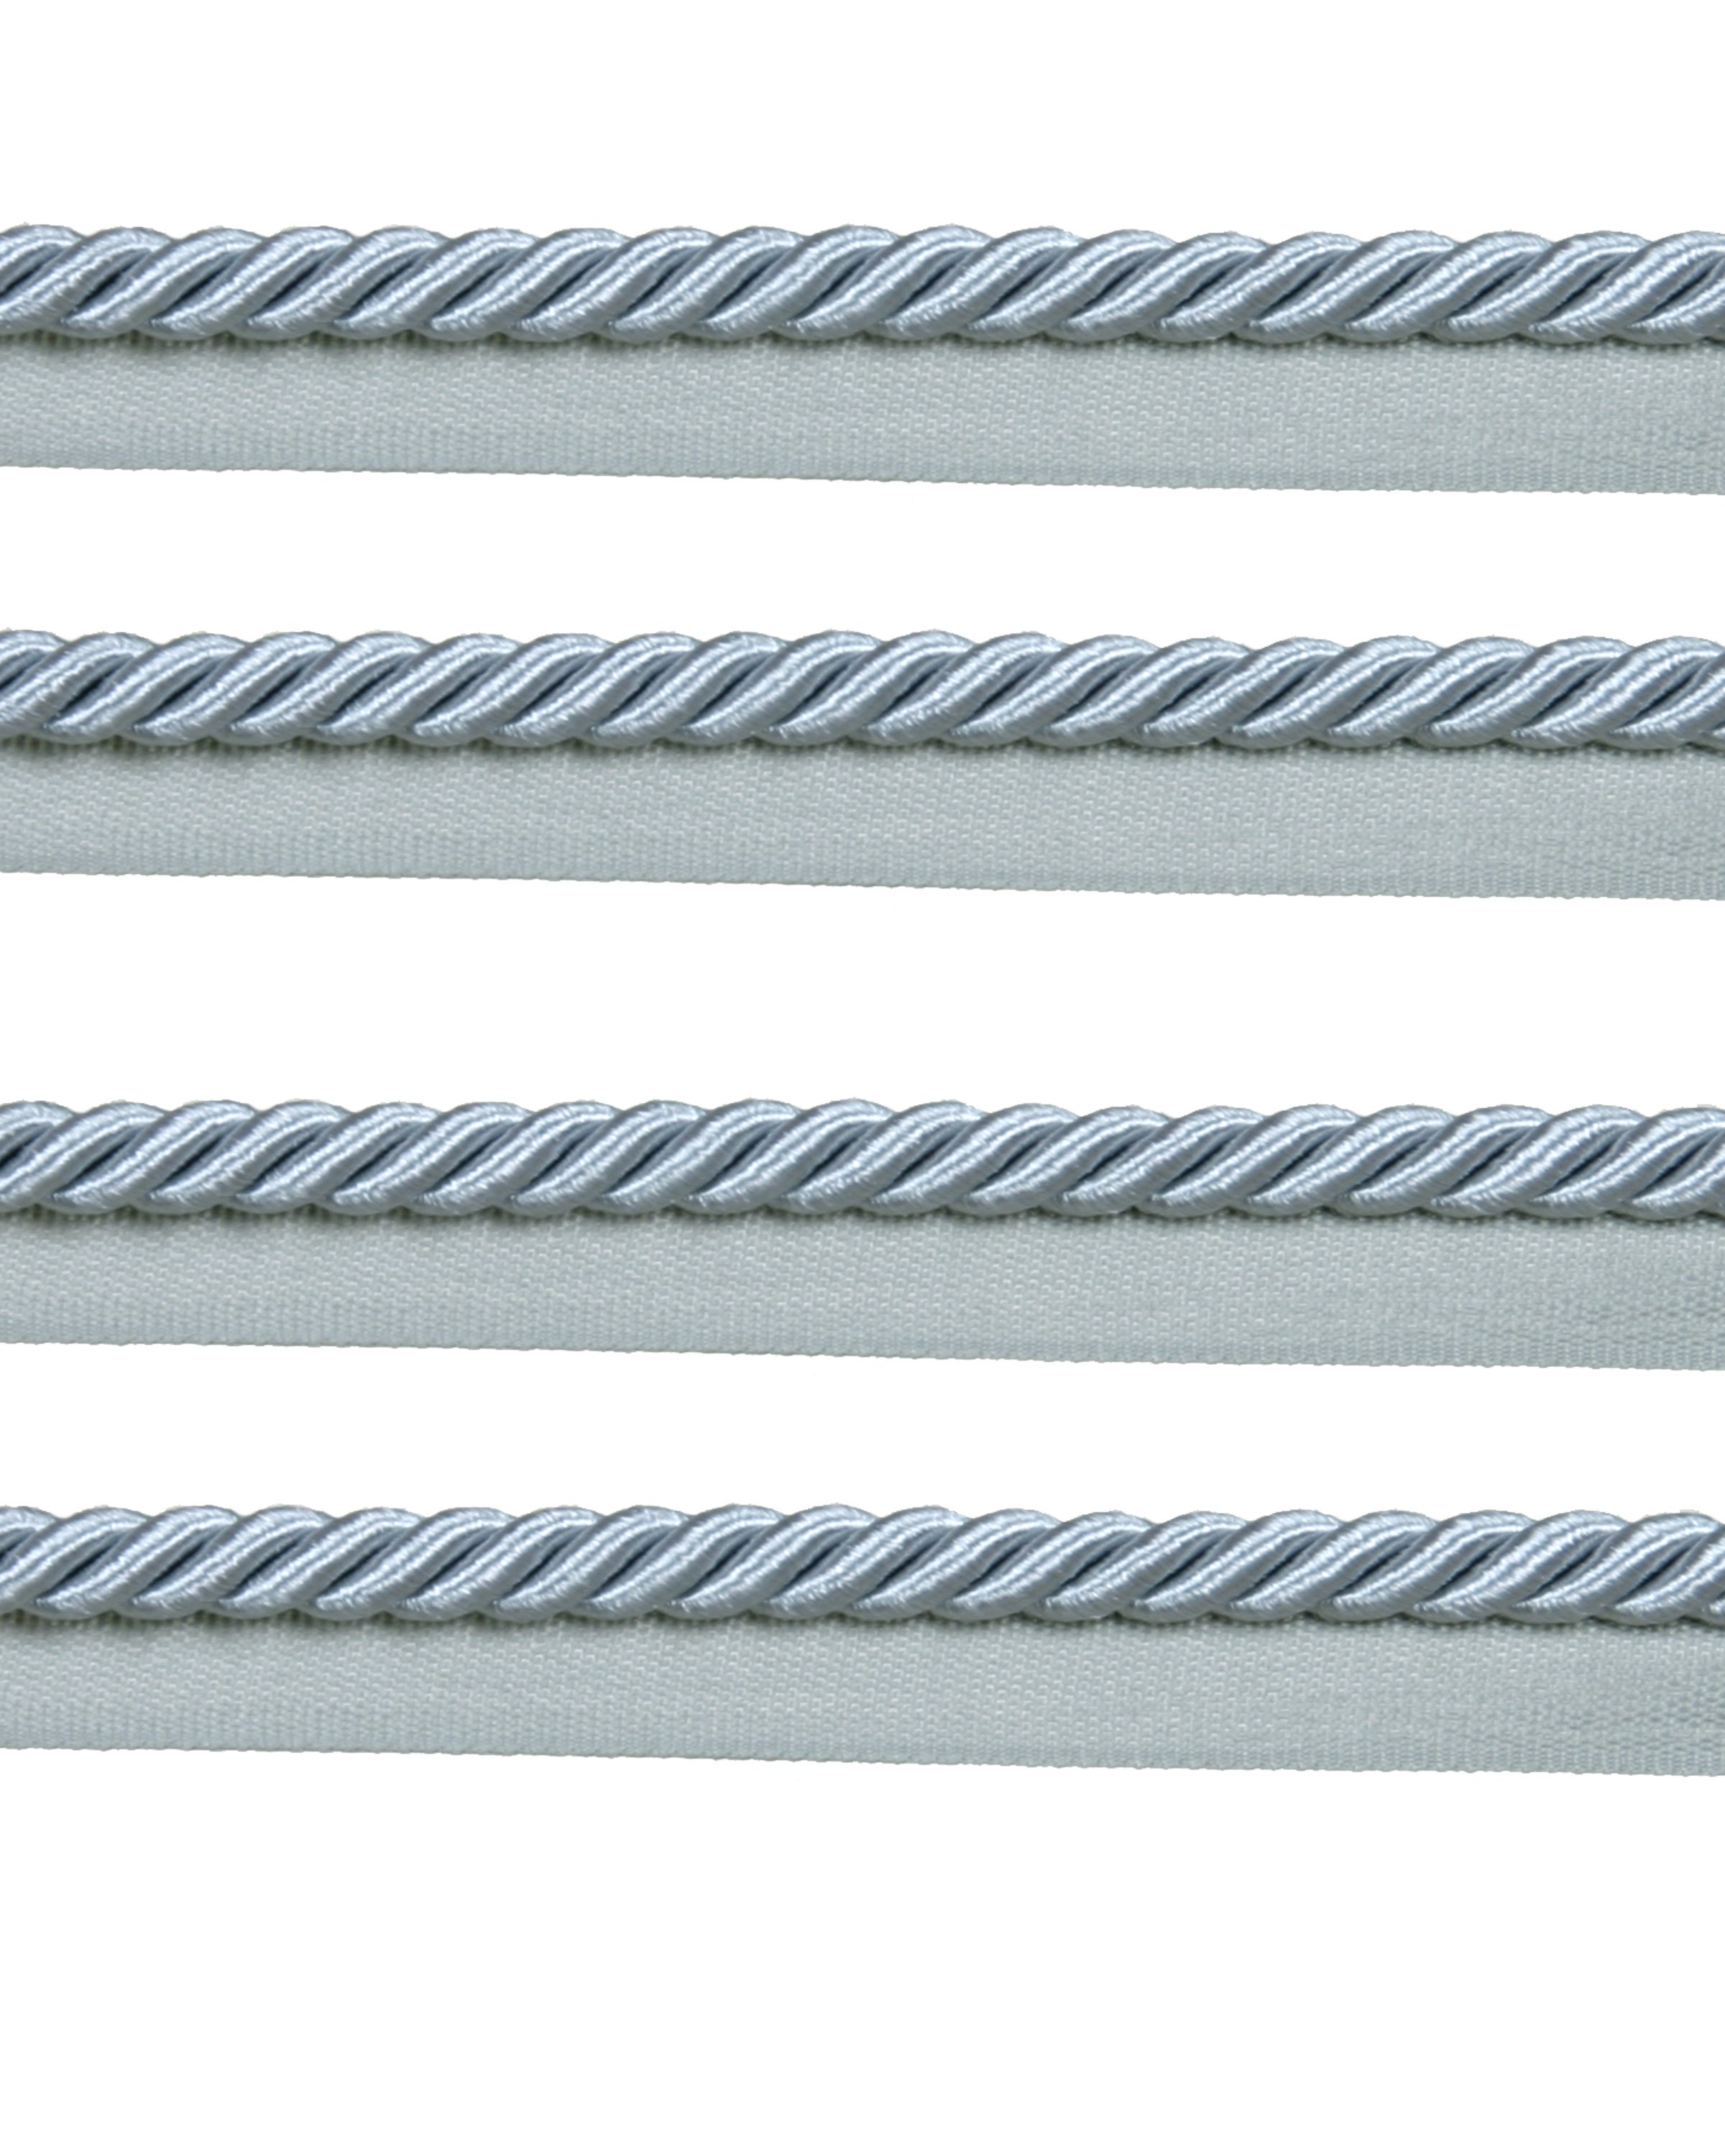 Piping Cord 8mm on Tape - French Silver Blue Price is for 5 metres